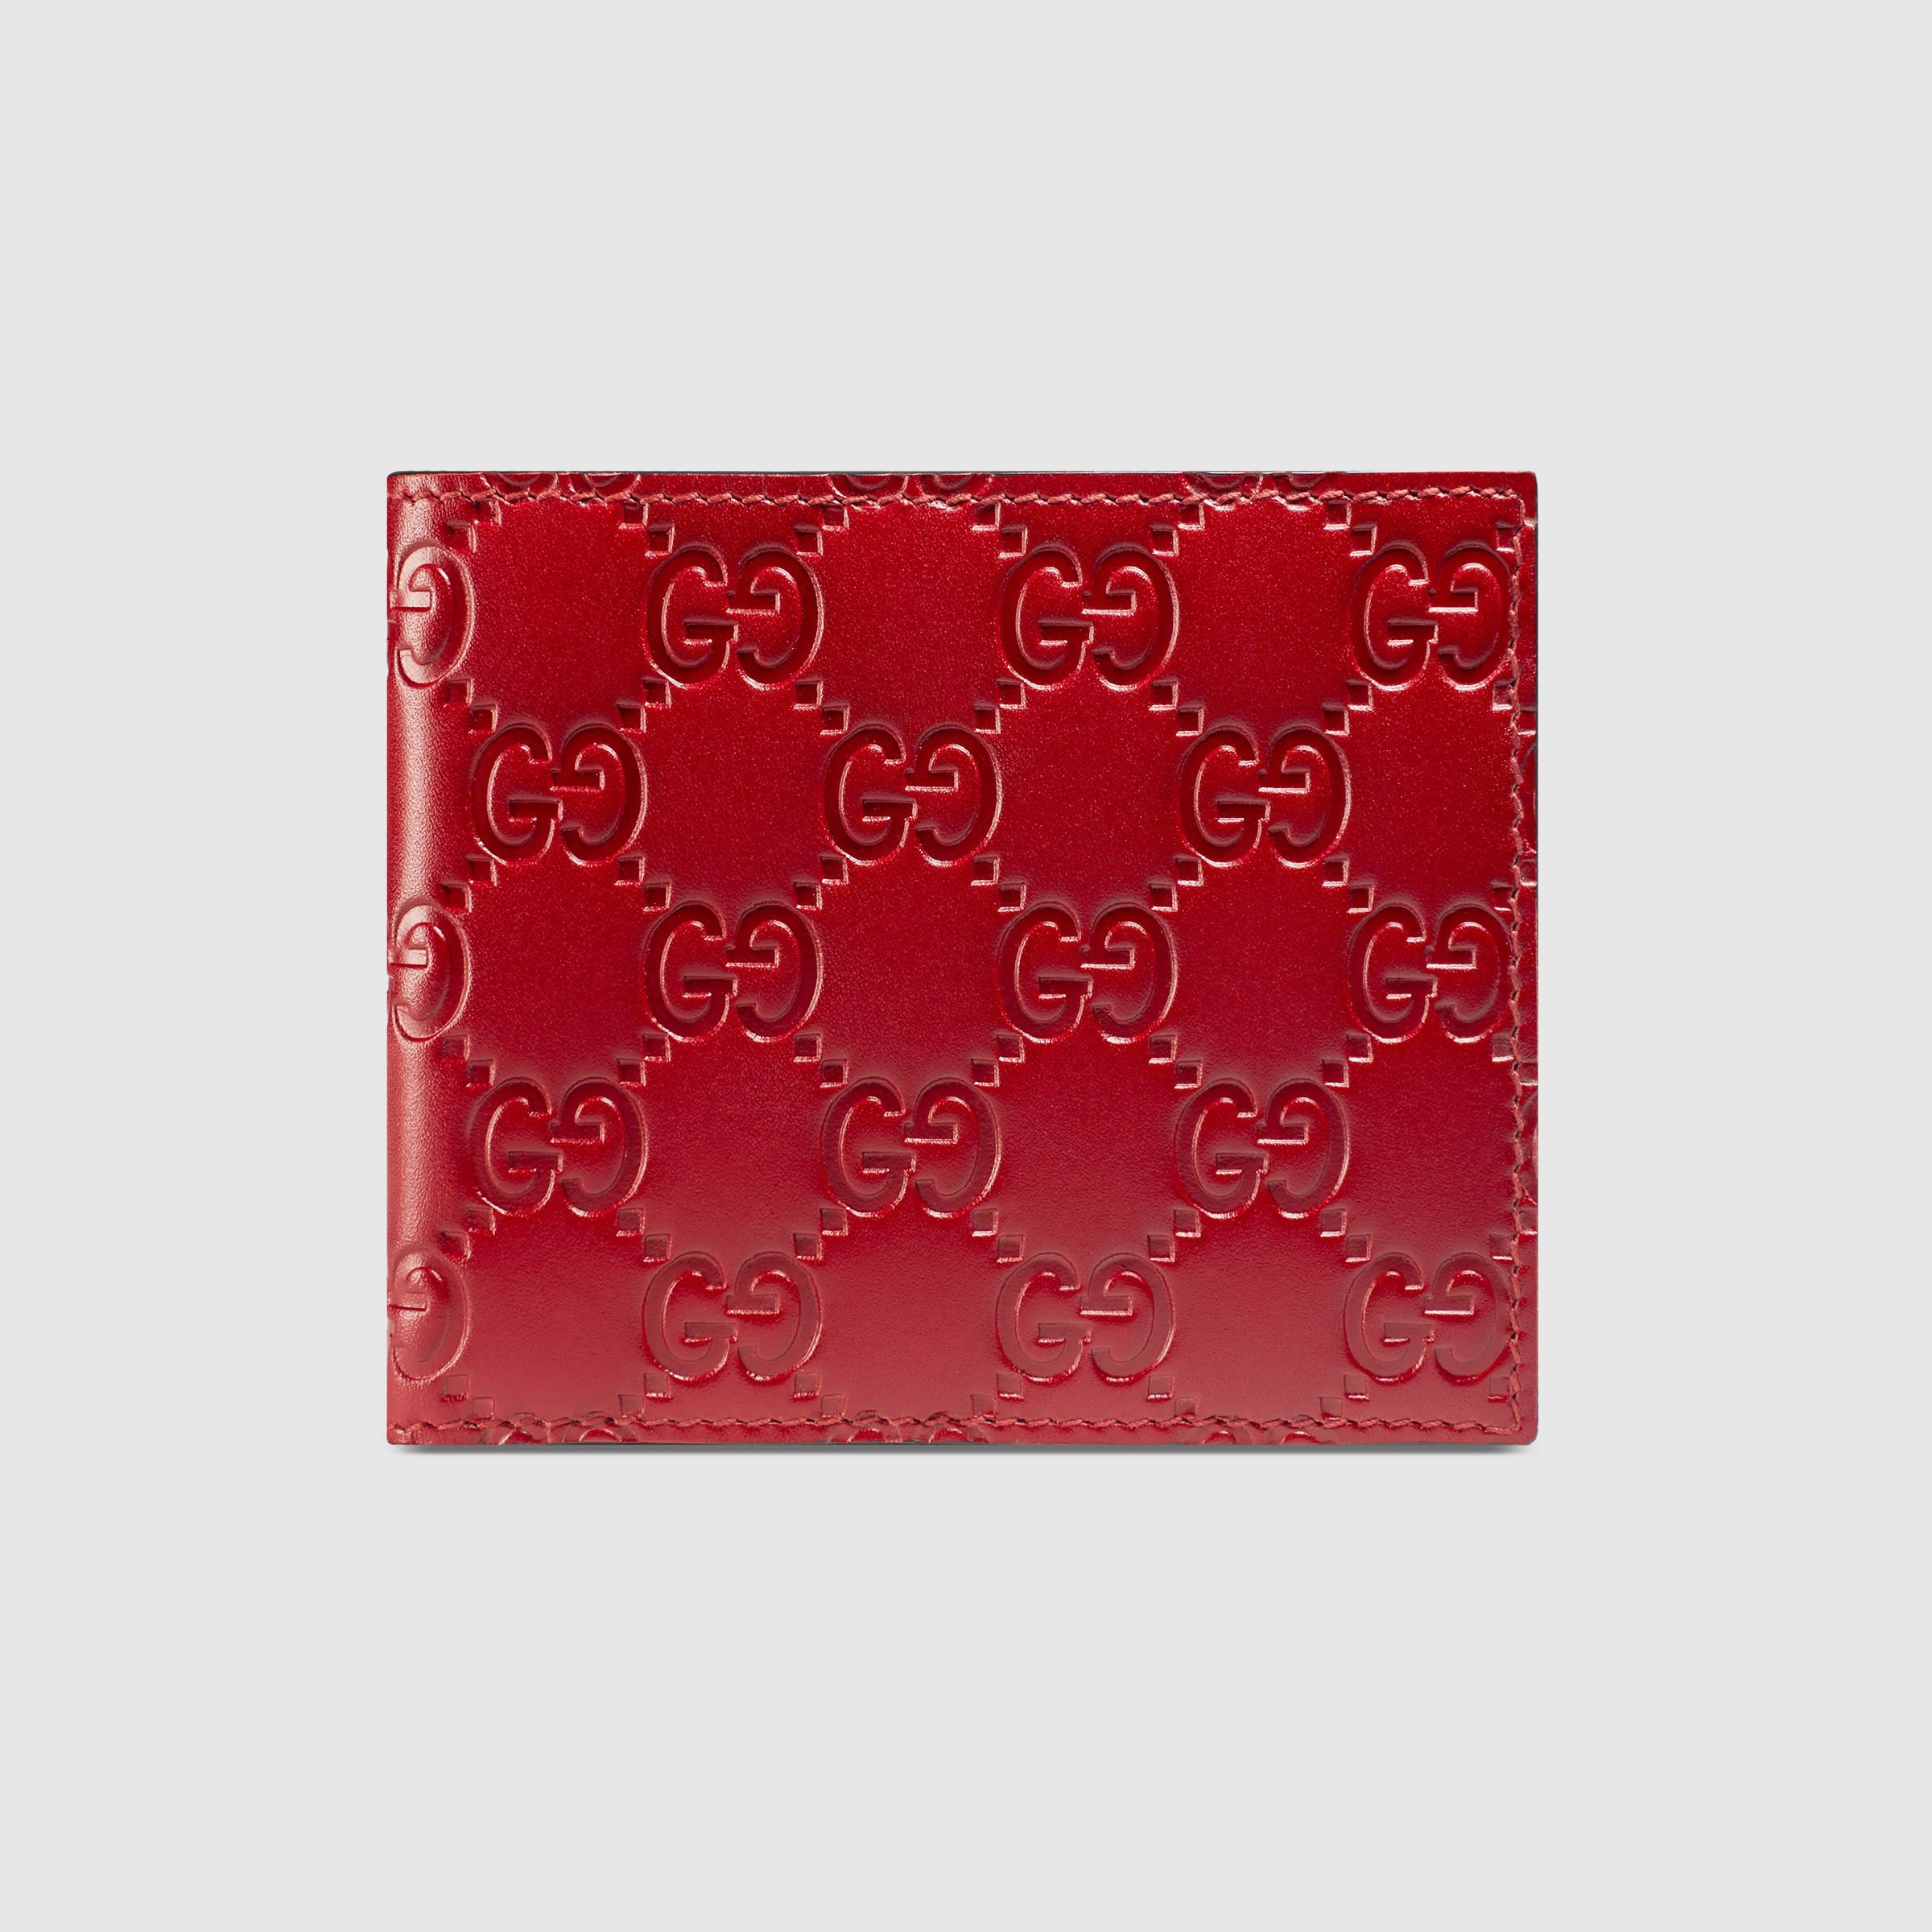 Lyst - Gucci Signature Wallet in Red for Men